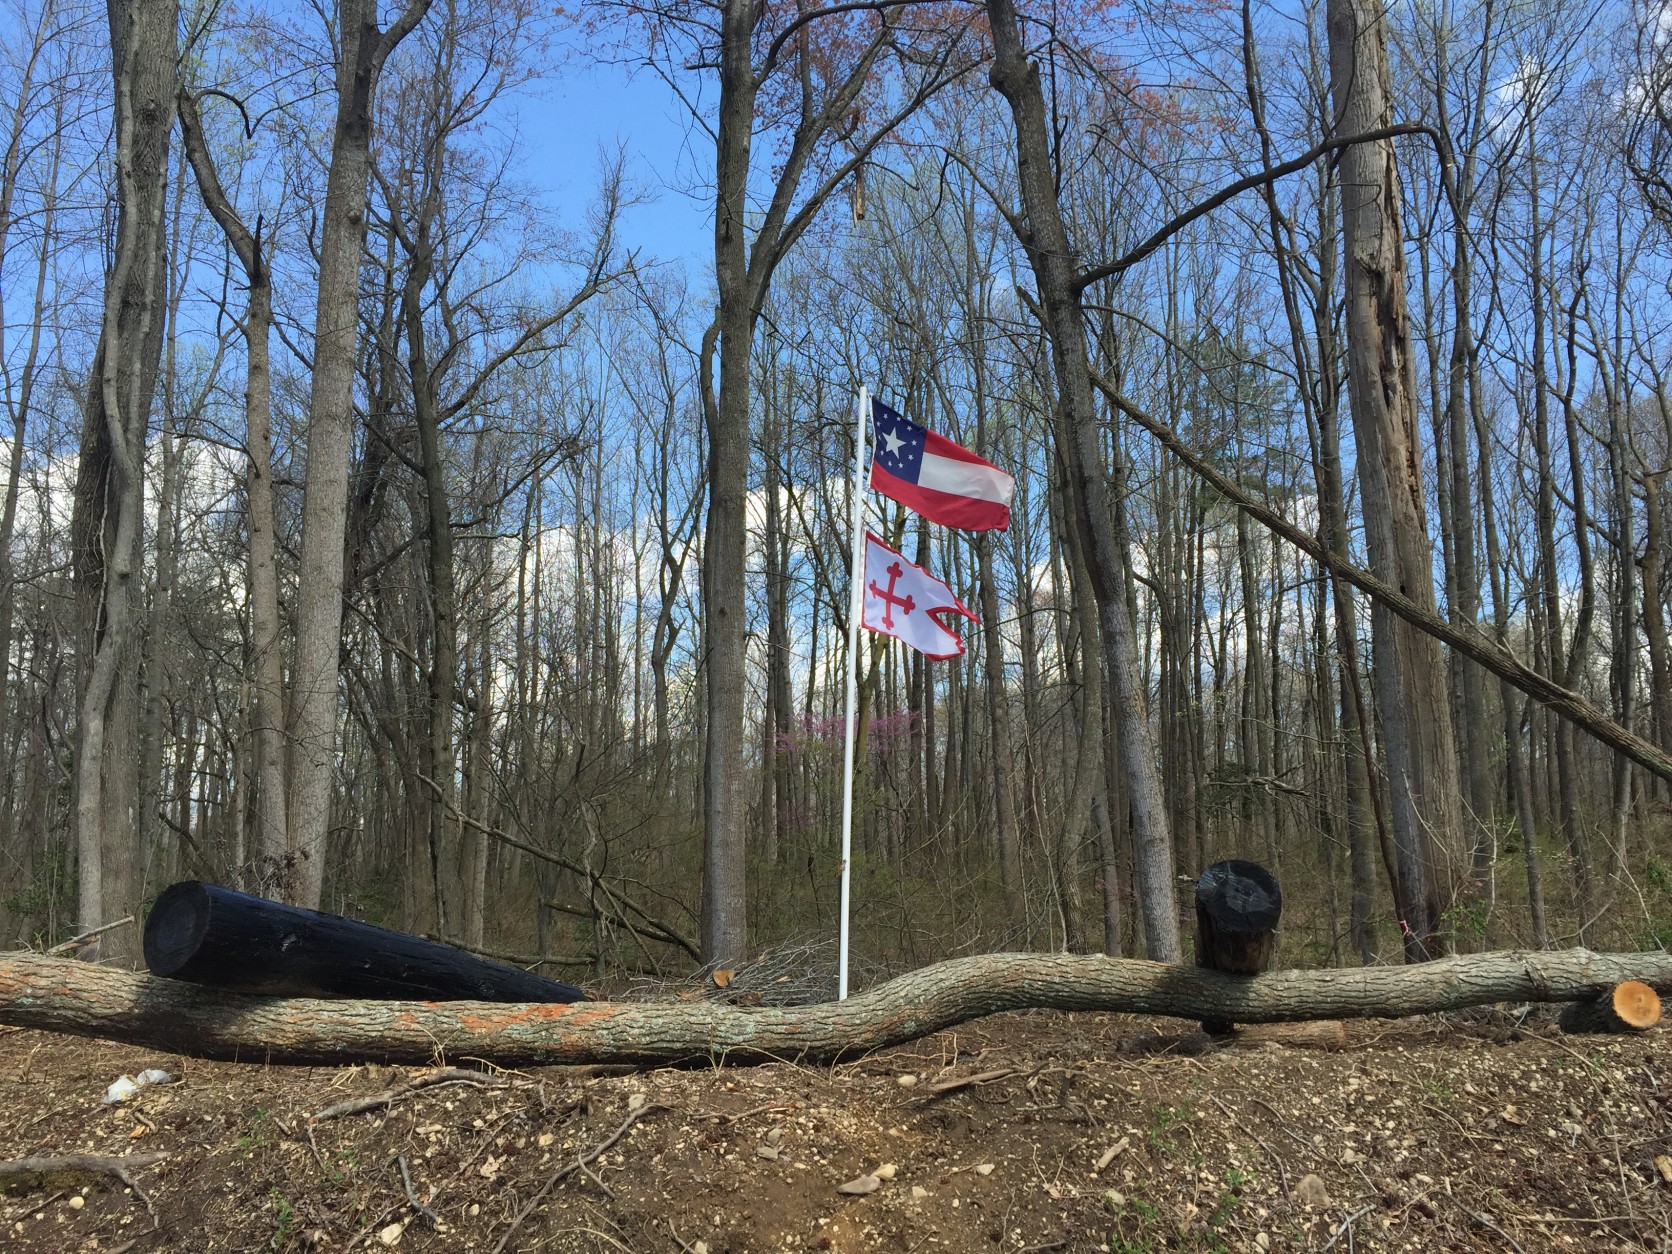 The flags can be seen about 40 feet behind the sign welcoming people to St. Mary's County. (WTOP/Michelle Basch)
